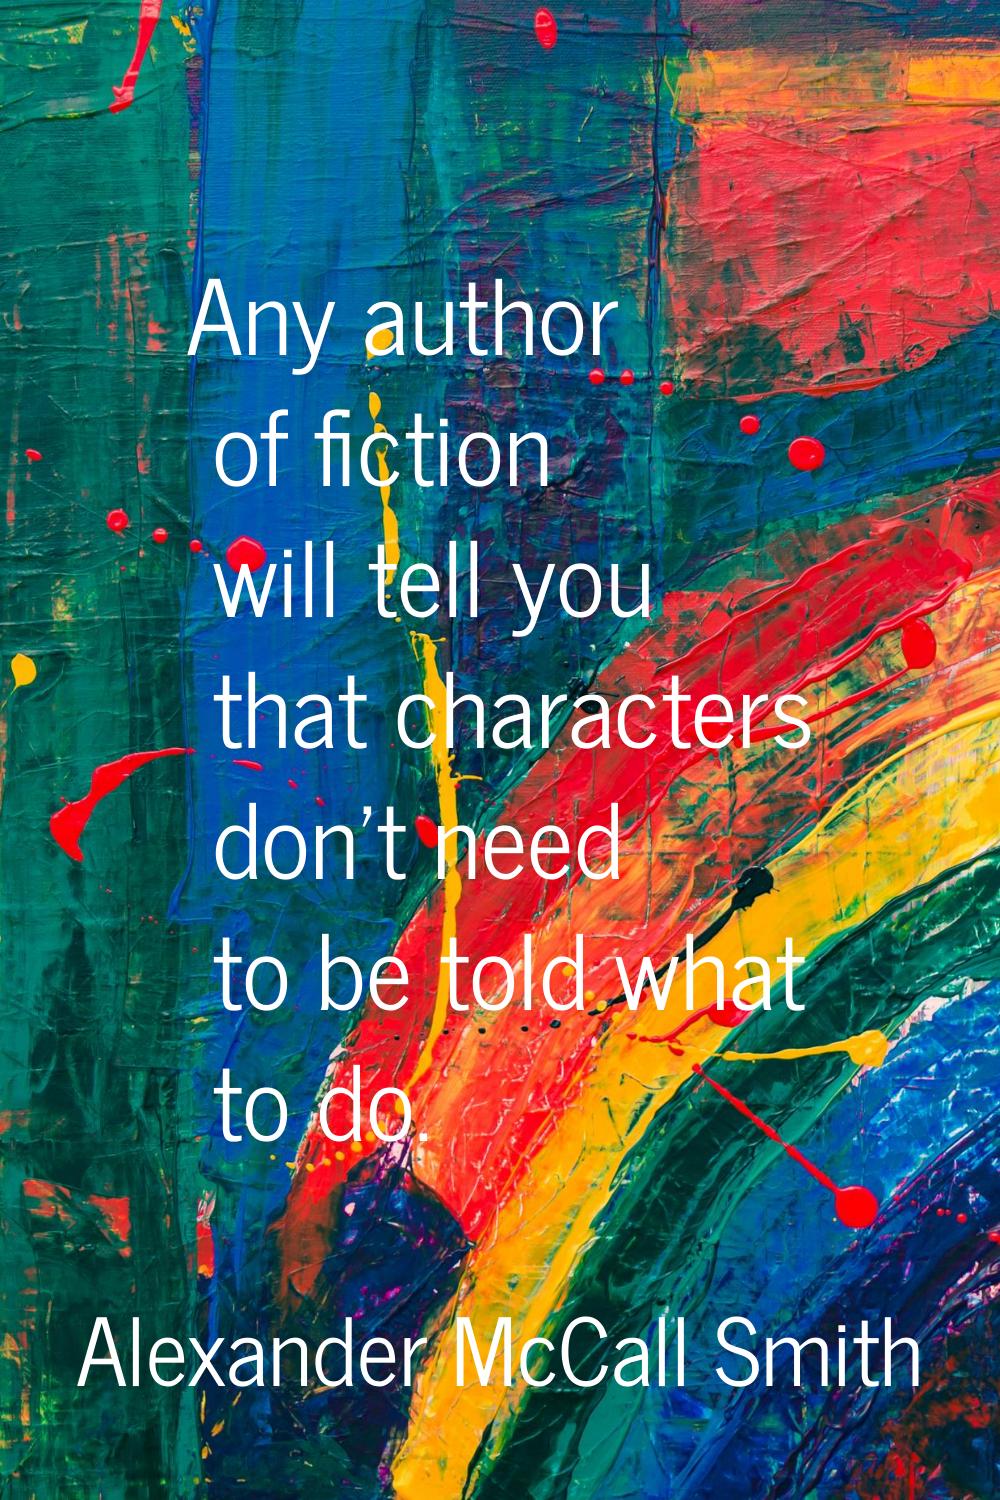 Any author of fiction will tell you that characters don't need to be told what to do.